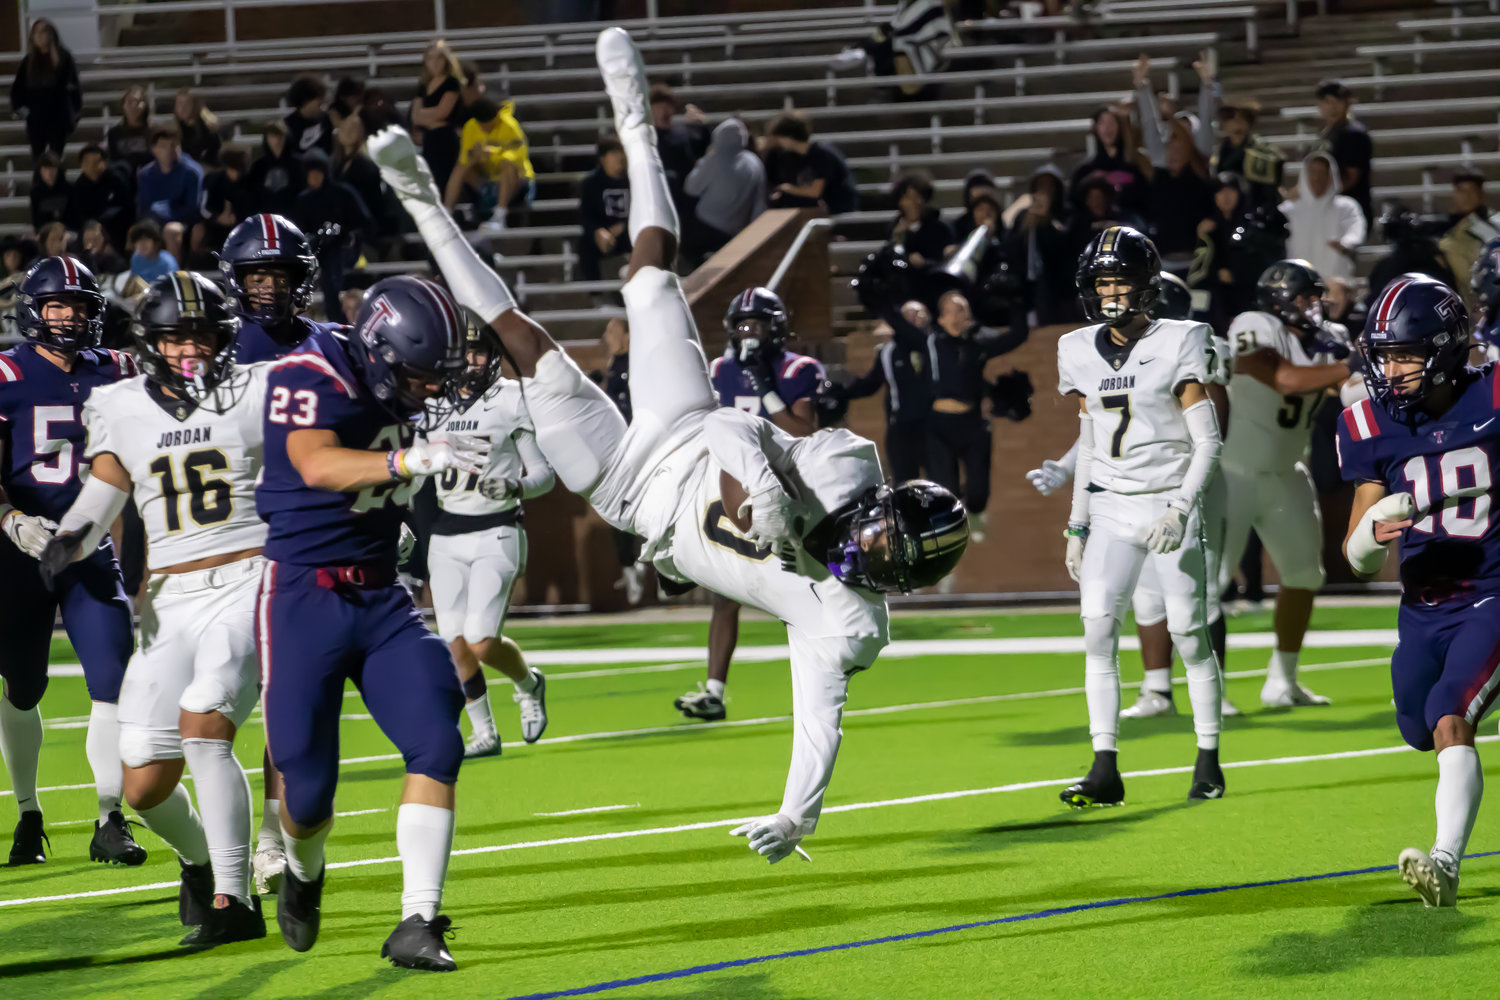 Jordan's Zion Jones dives into the endzone for a touchdown during Friday's game between Tompkins and Jordan at Rhodes Stadium.